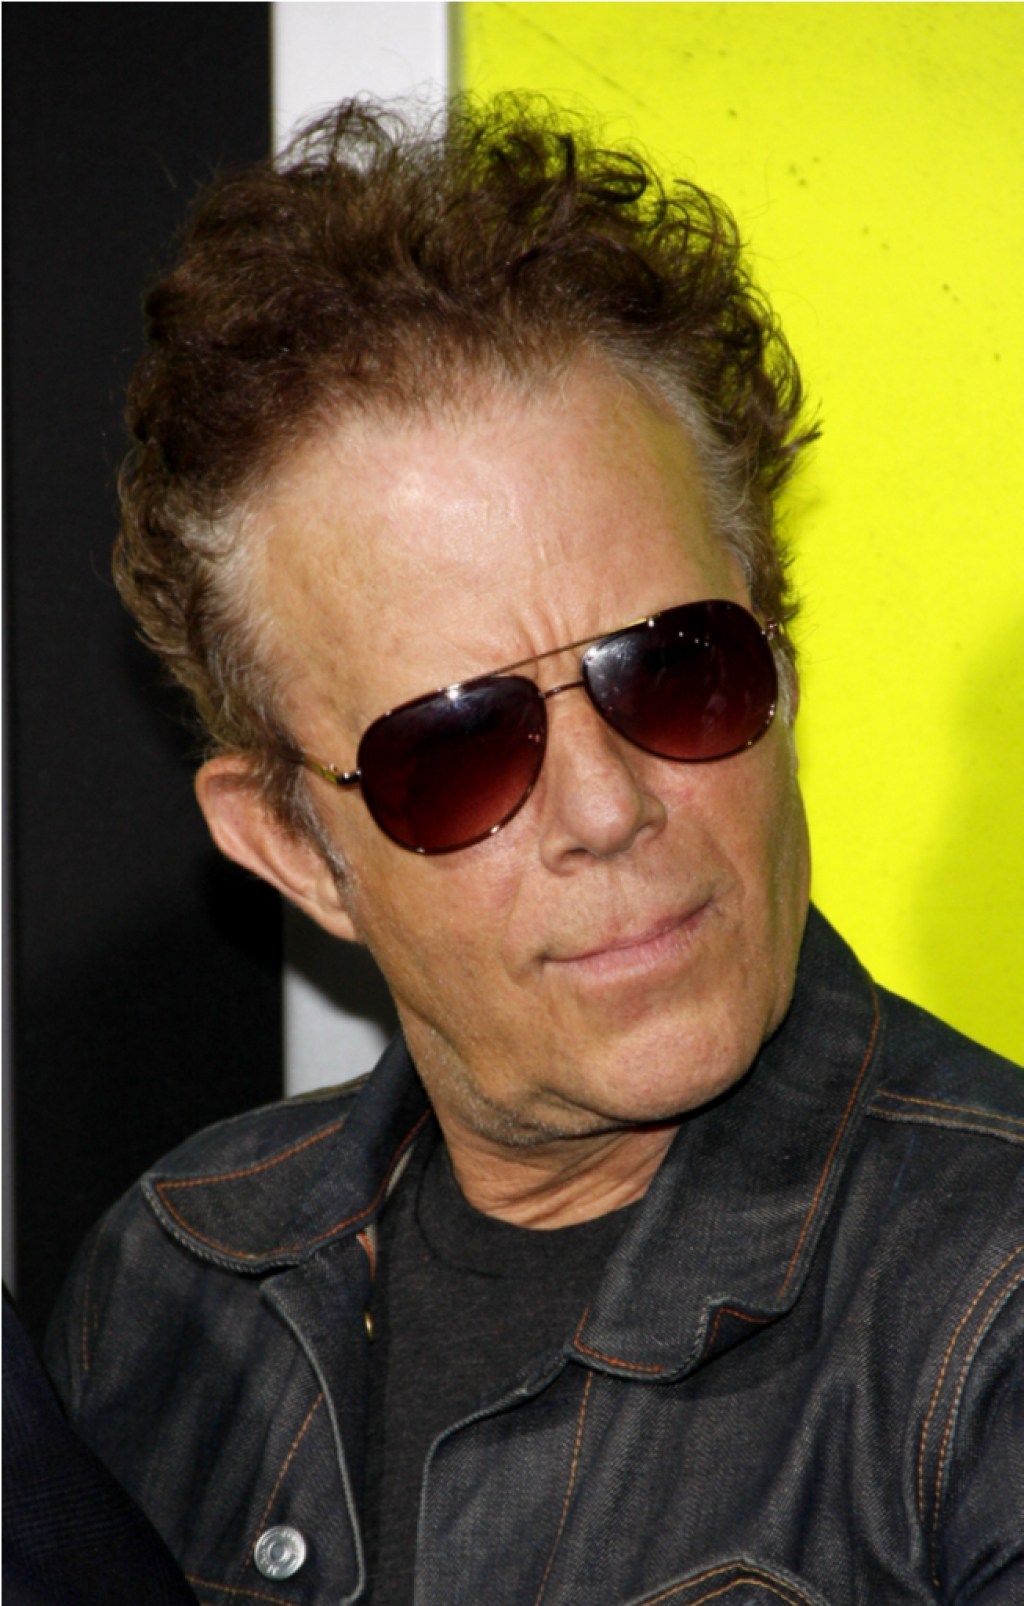 Tom Waits Musicians Dying to Actors